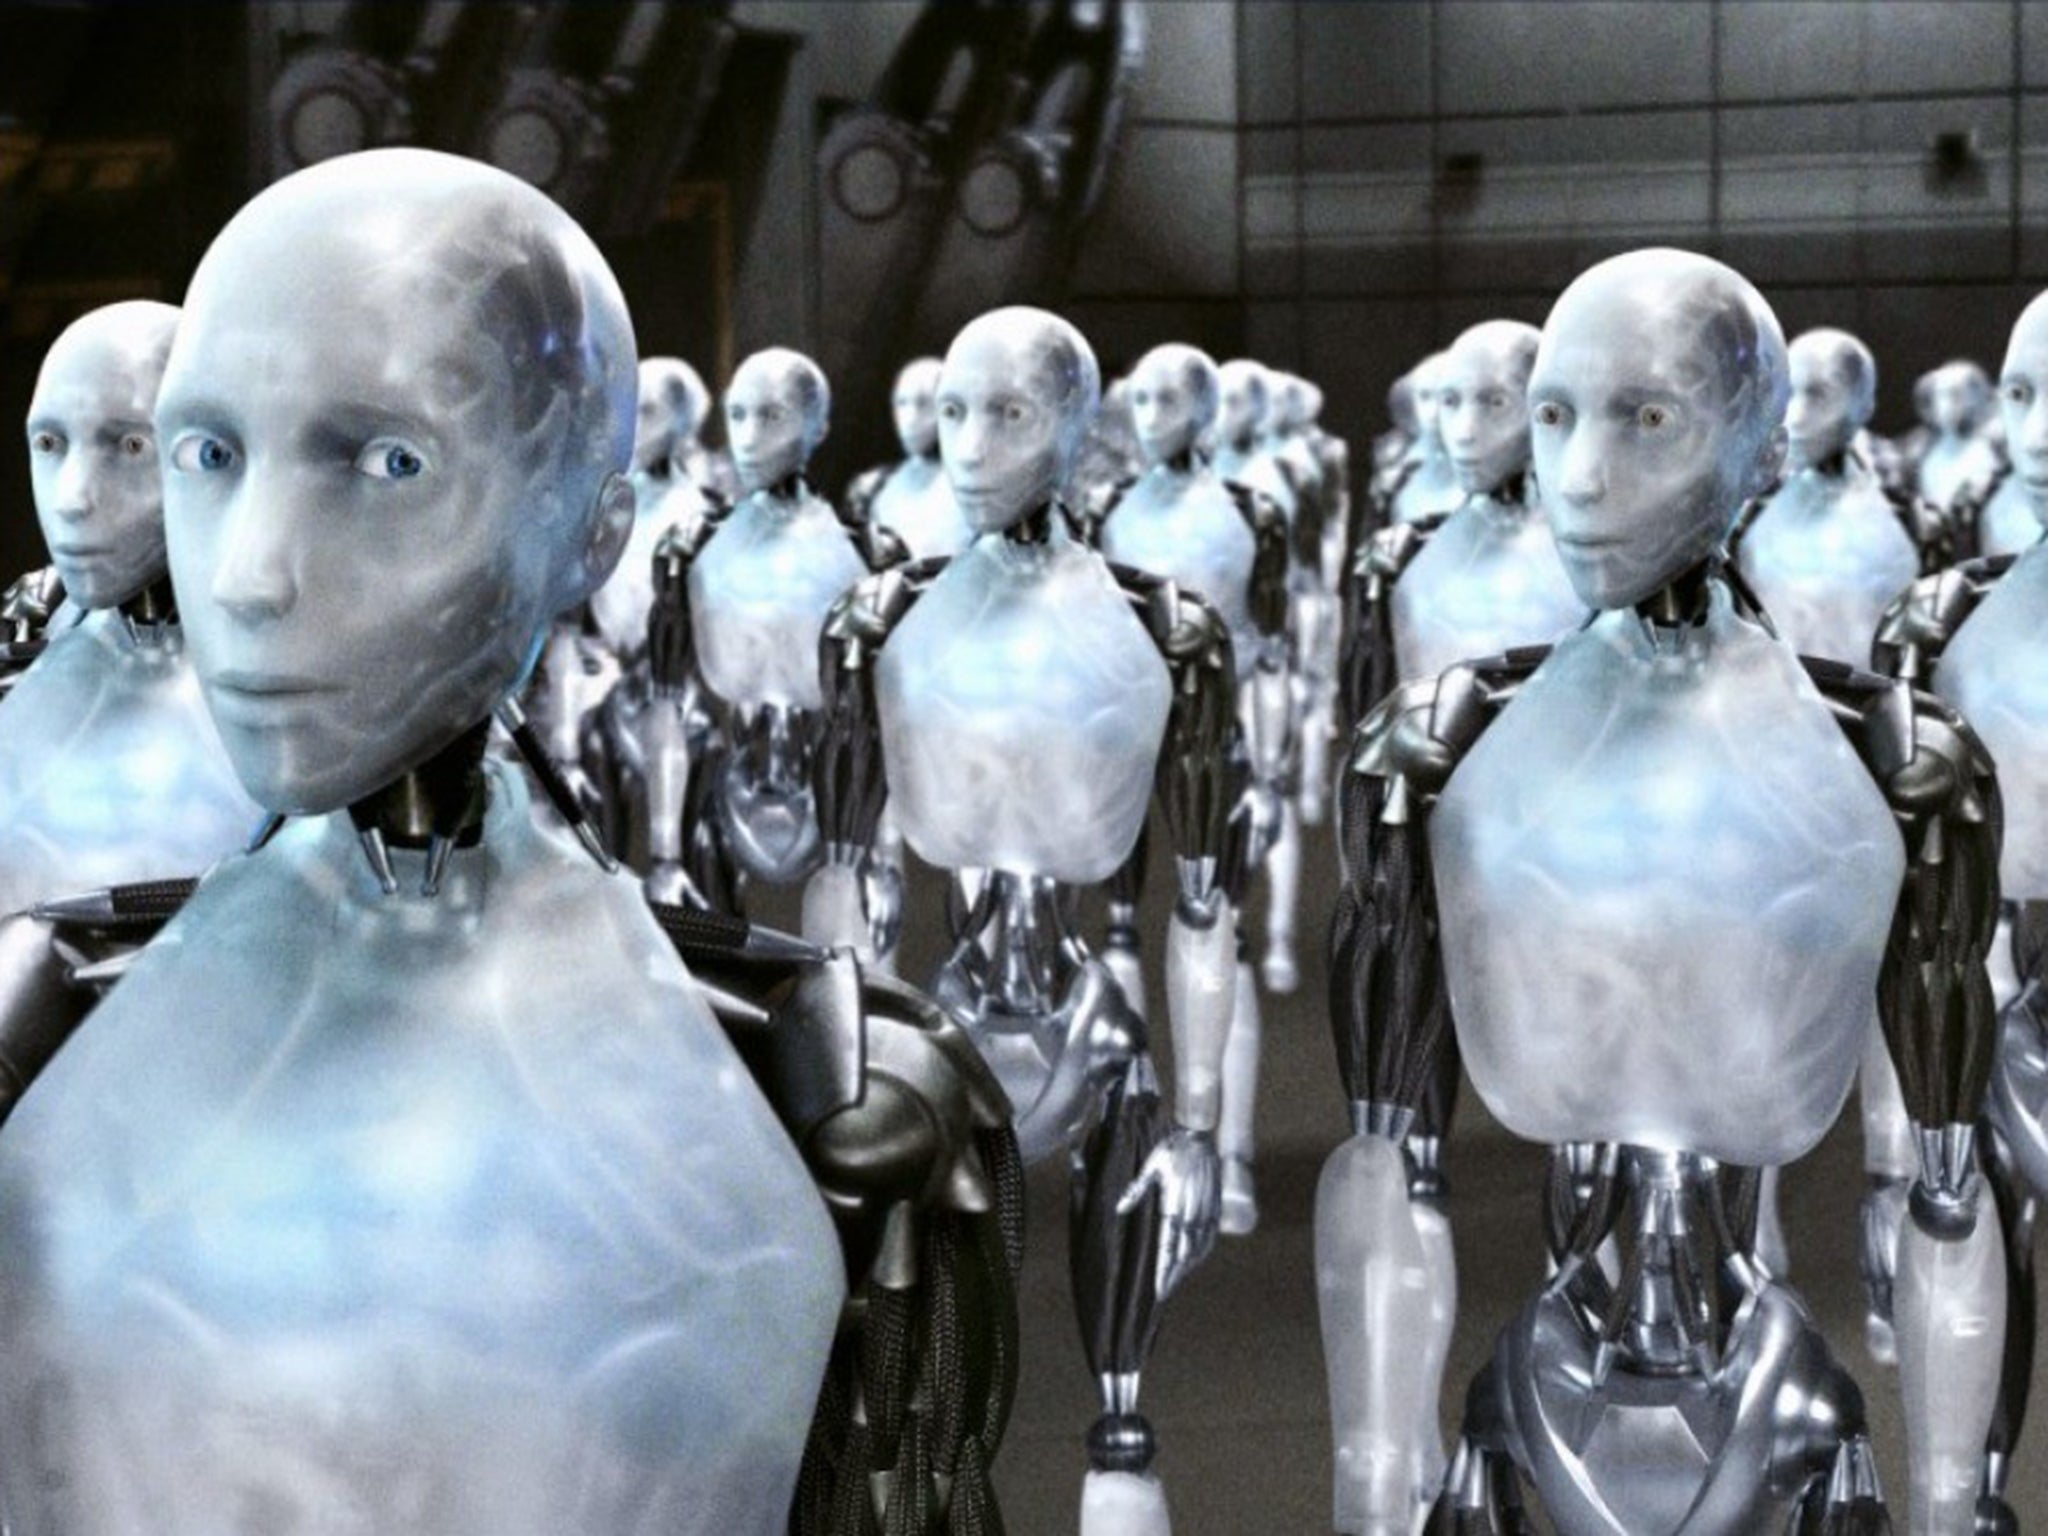 Movies such as 'I, Robot' have speculated on the threat that artificial intelligence may pose